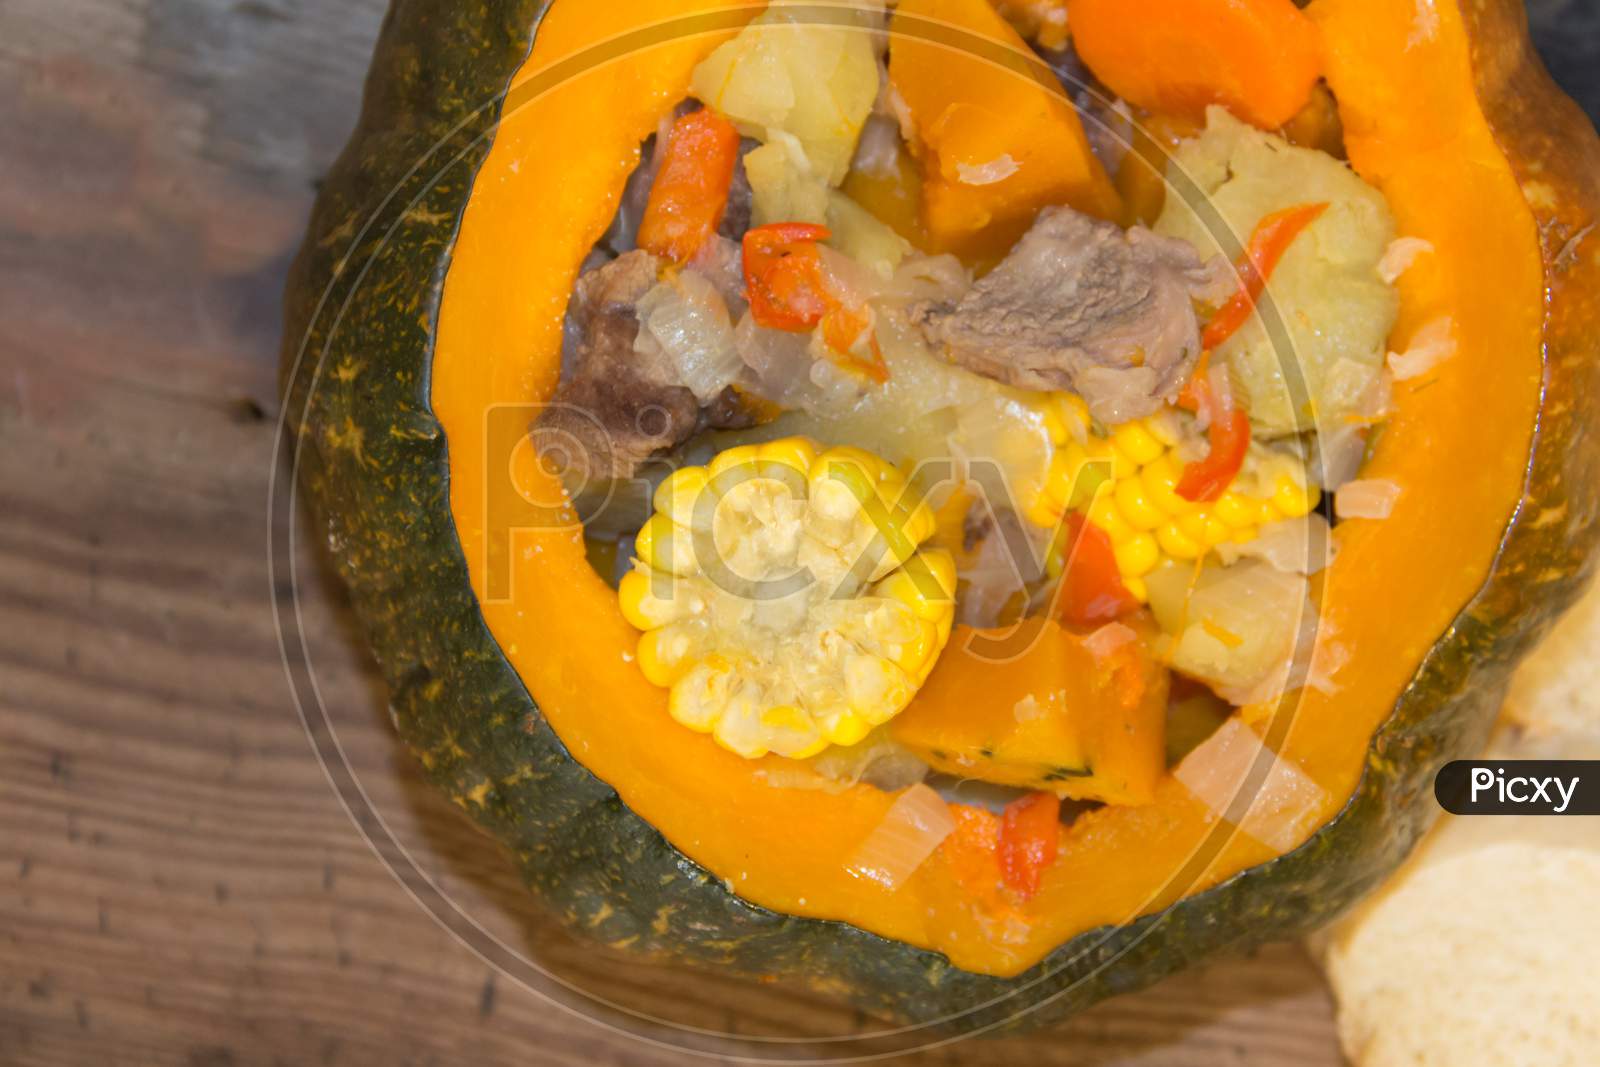 Carbonada Served In Pumpkin Typical Food Of The Argentine Gastronomy, Chile, Bolivia And Peru.